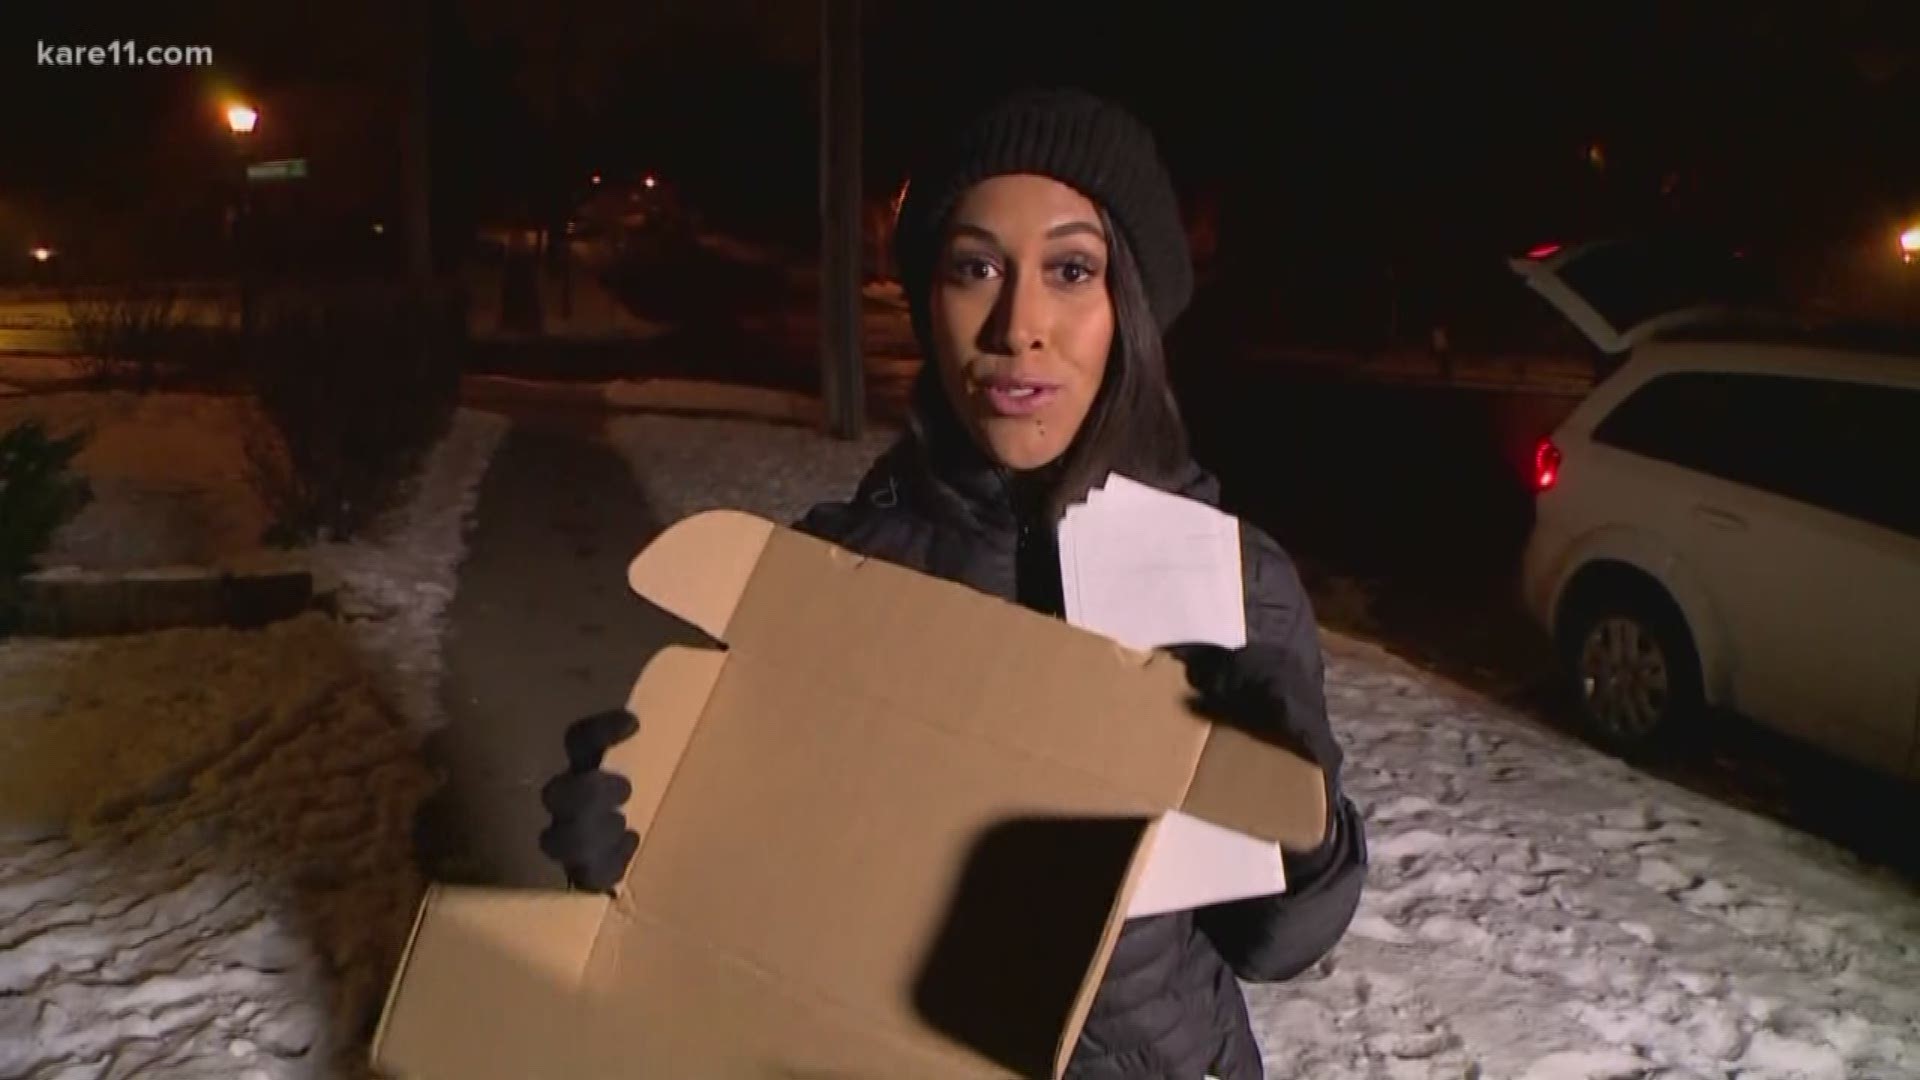 Around 100 reports of package thefts have been recorded in the city. https://kare11.tv/2Gf0HDV